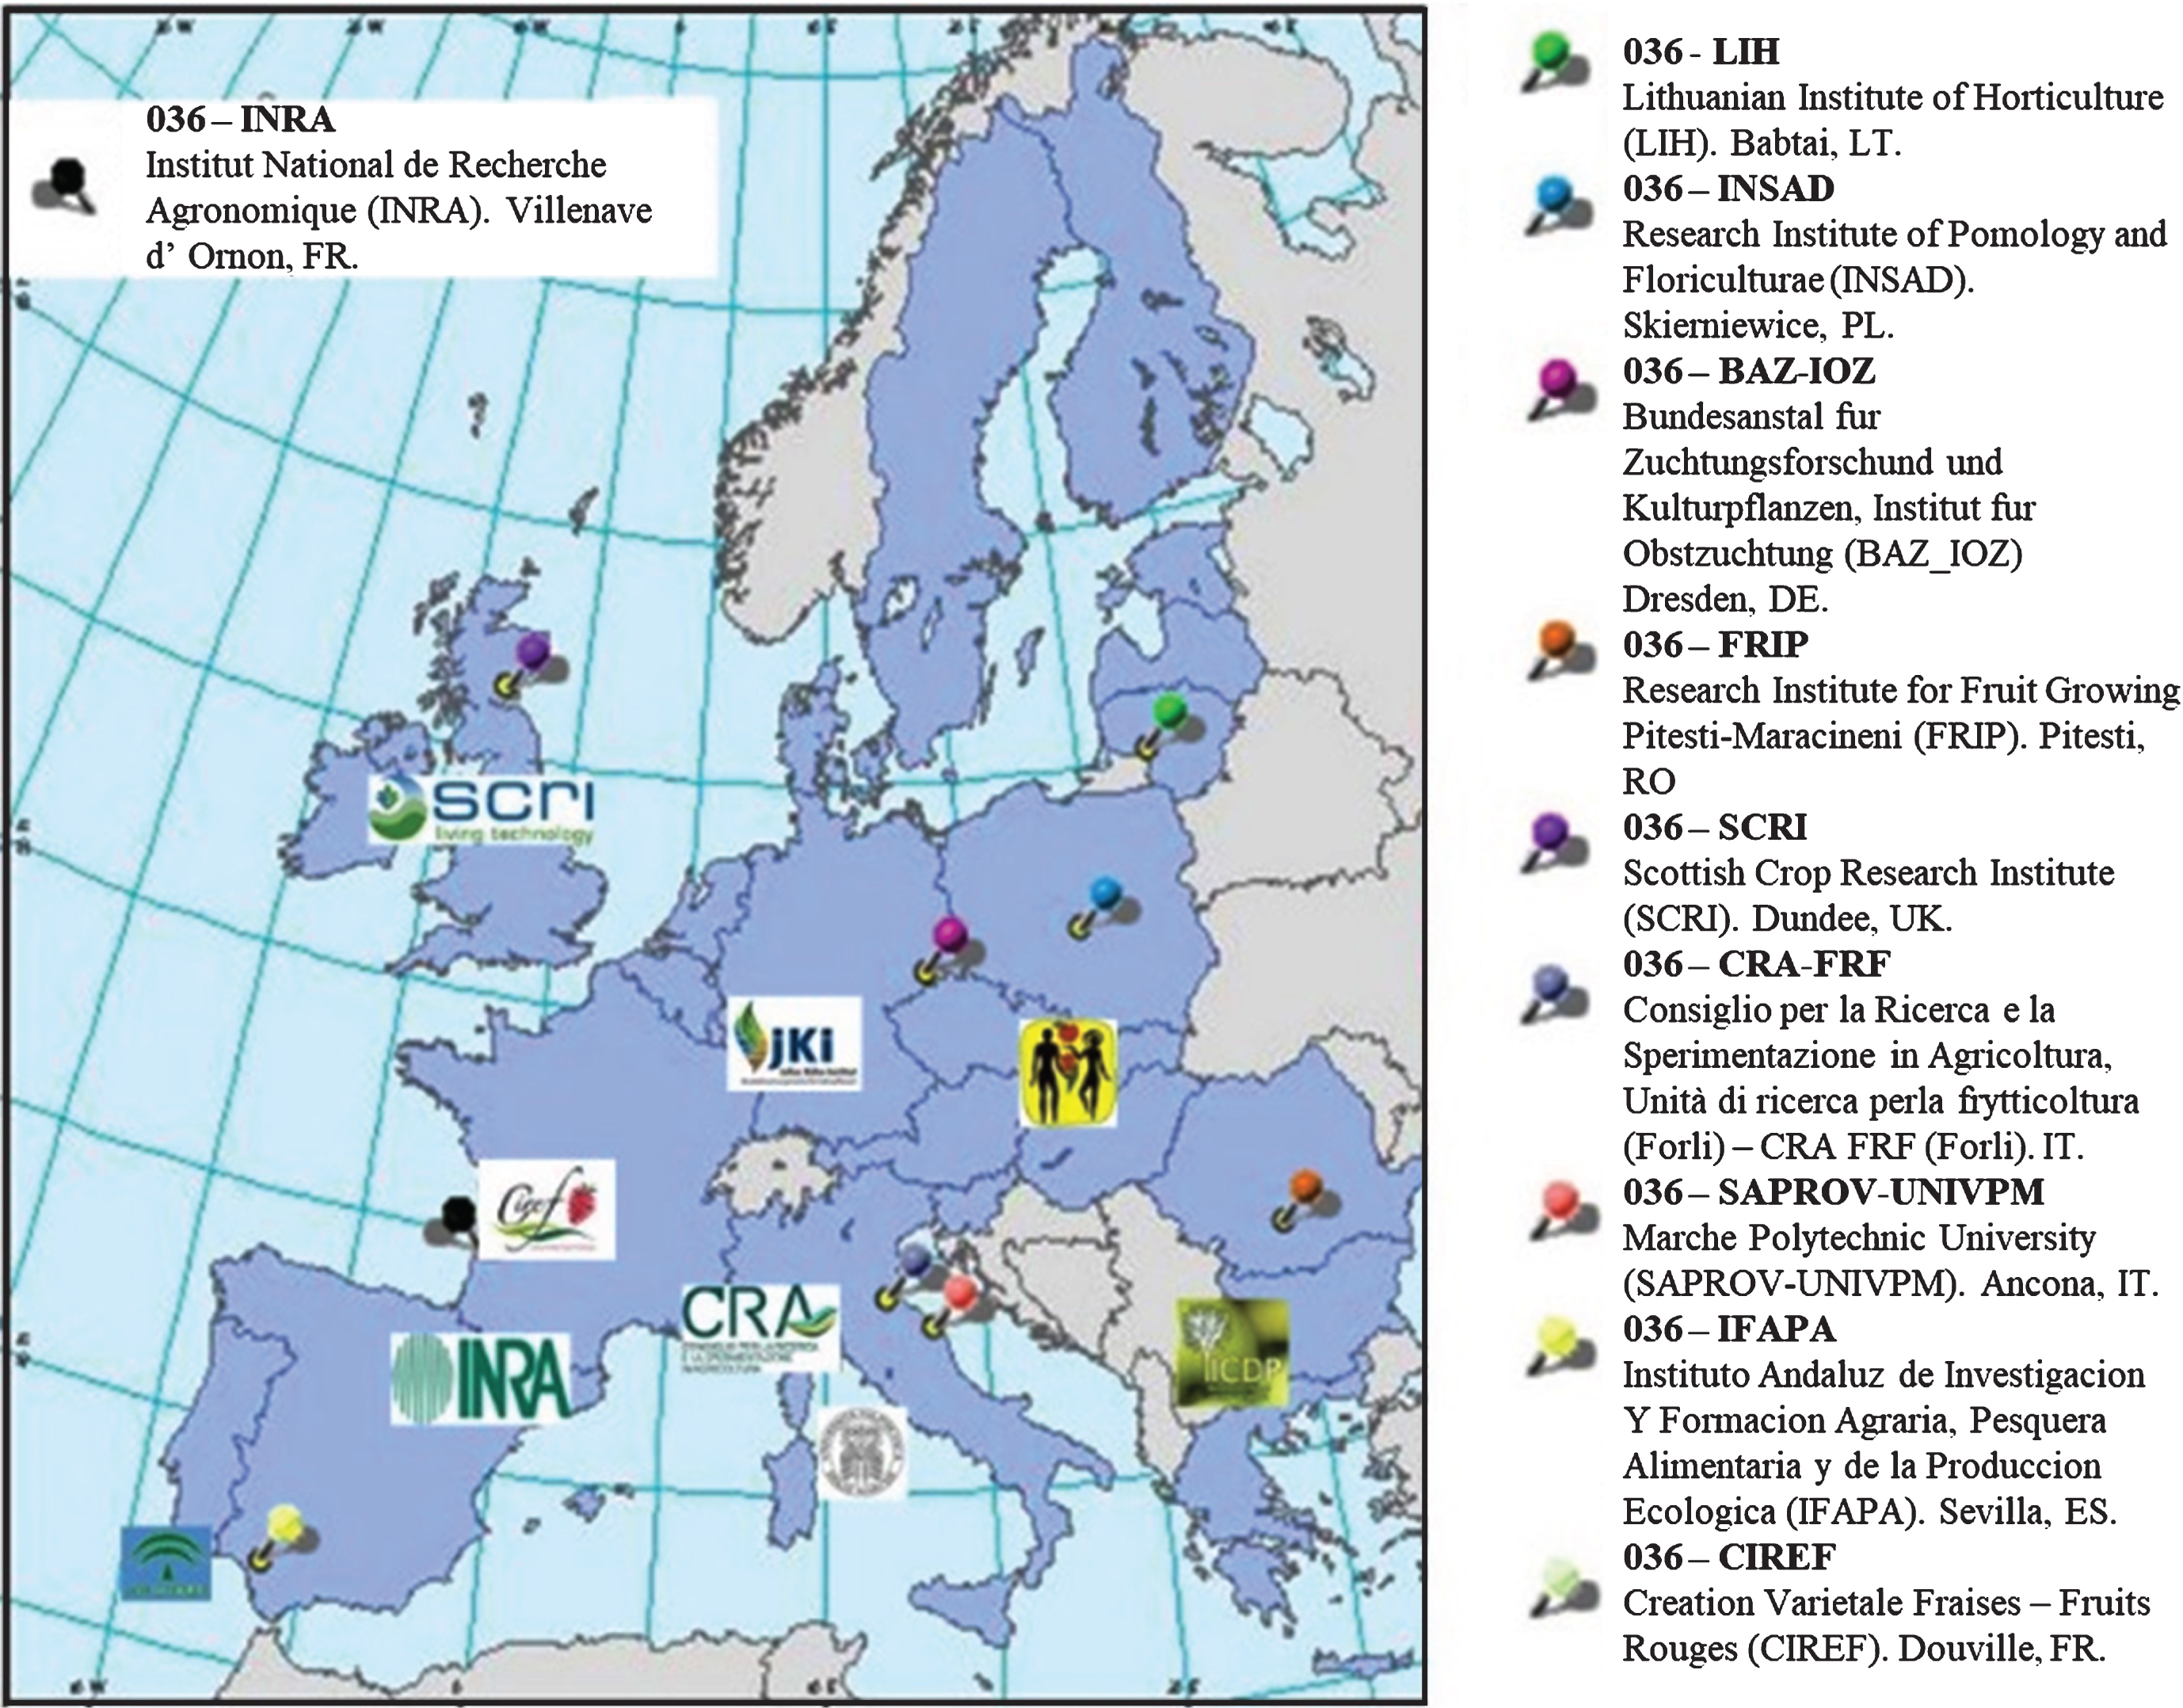 List and map of locations of the EU strawberry germplasm repository.